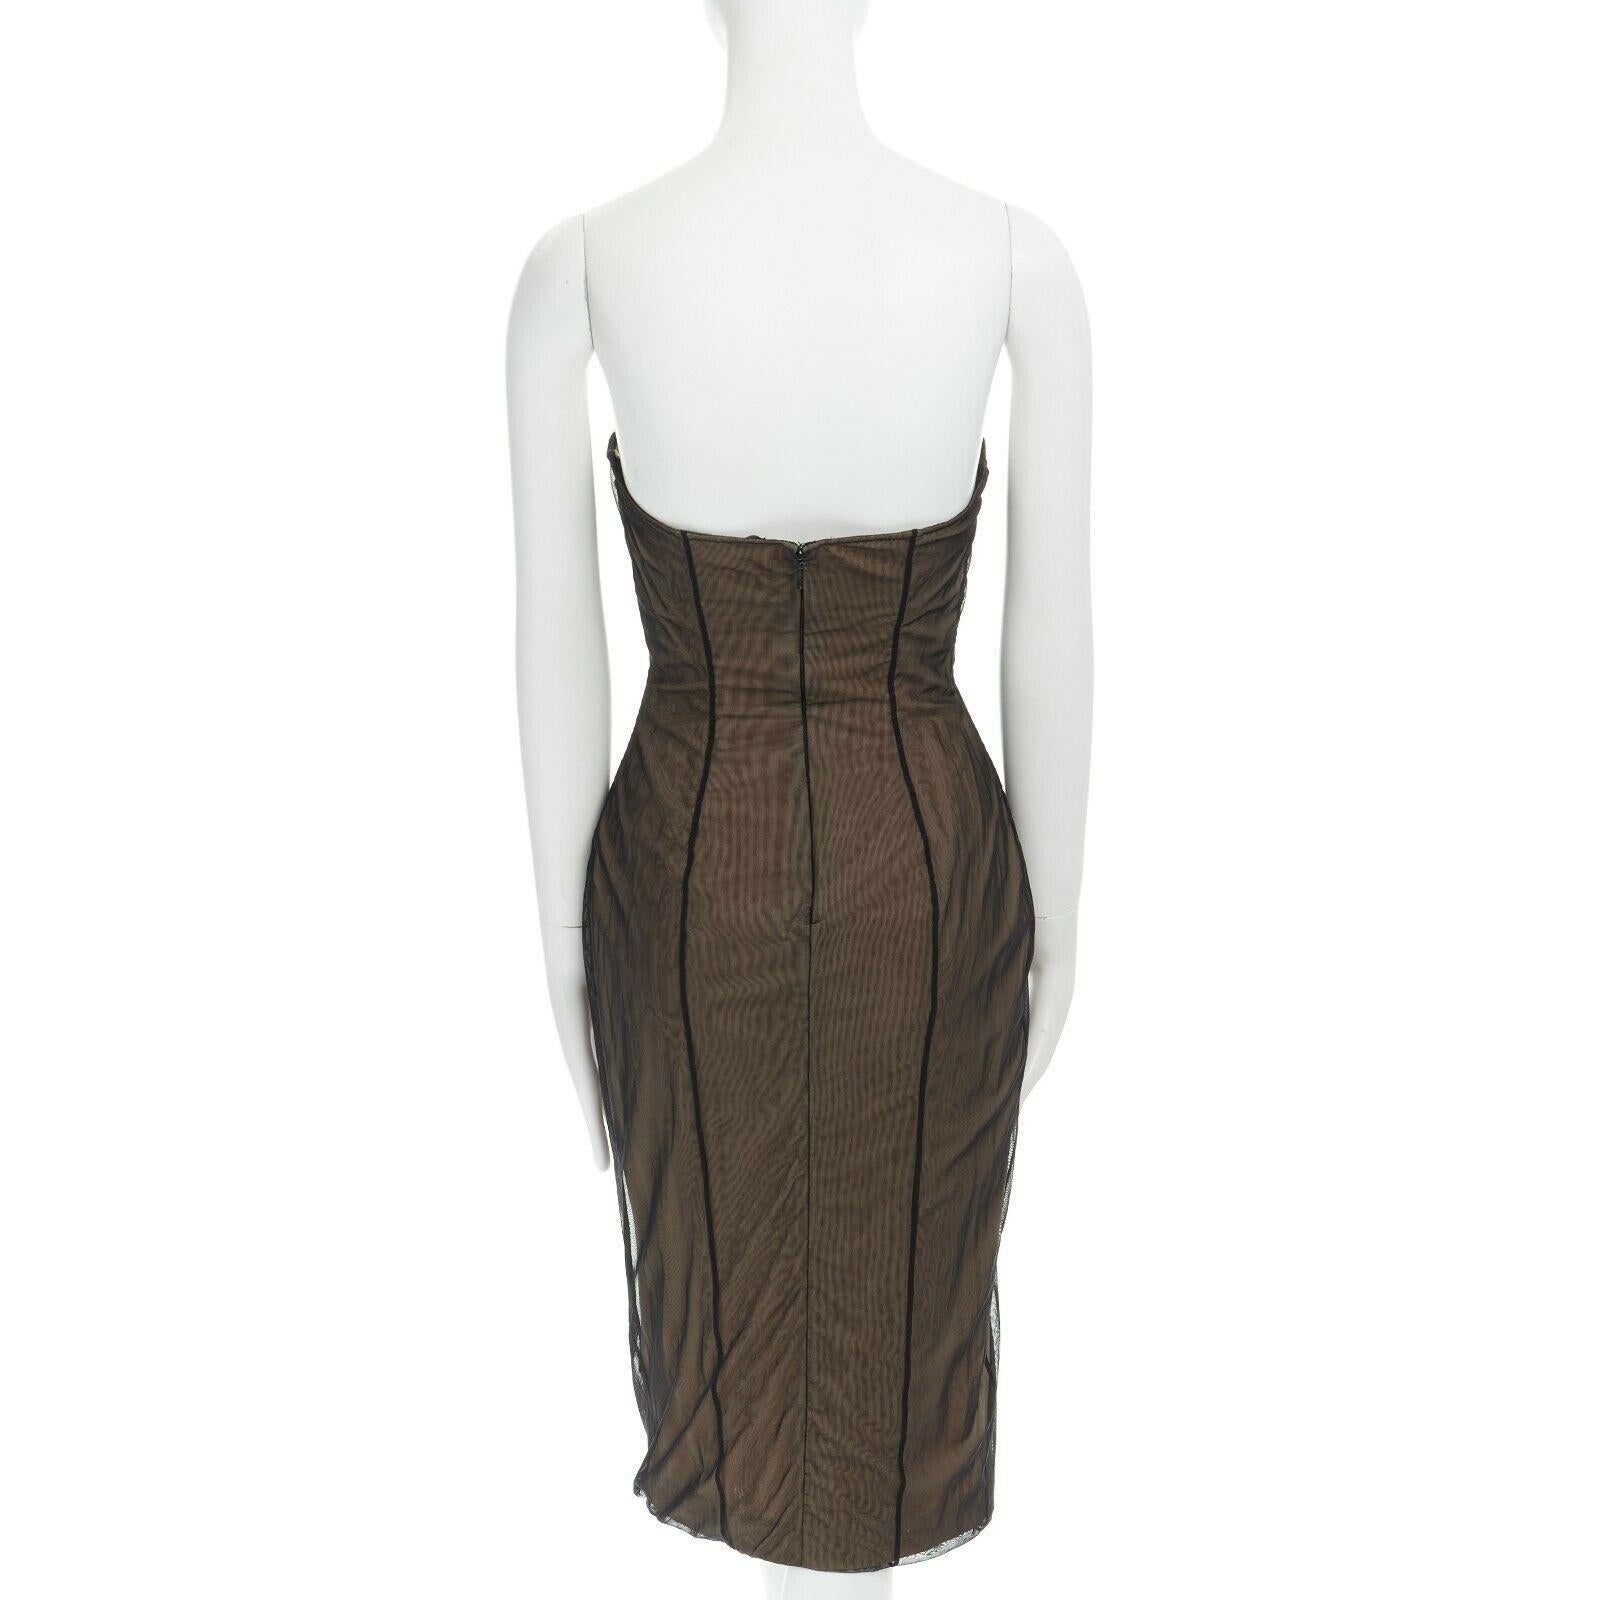 Black runway GUCCI TOM FORD Vintage nude mesh corset strapless cocktail dress IT40 US4